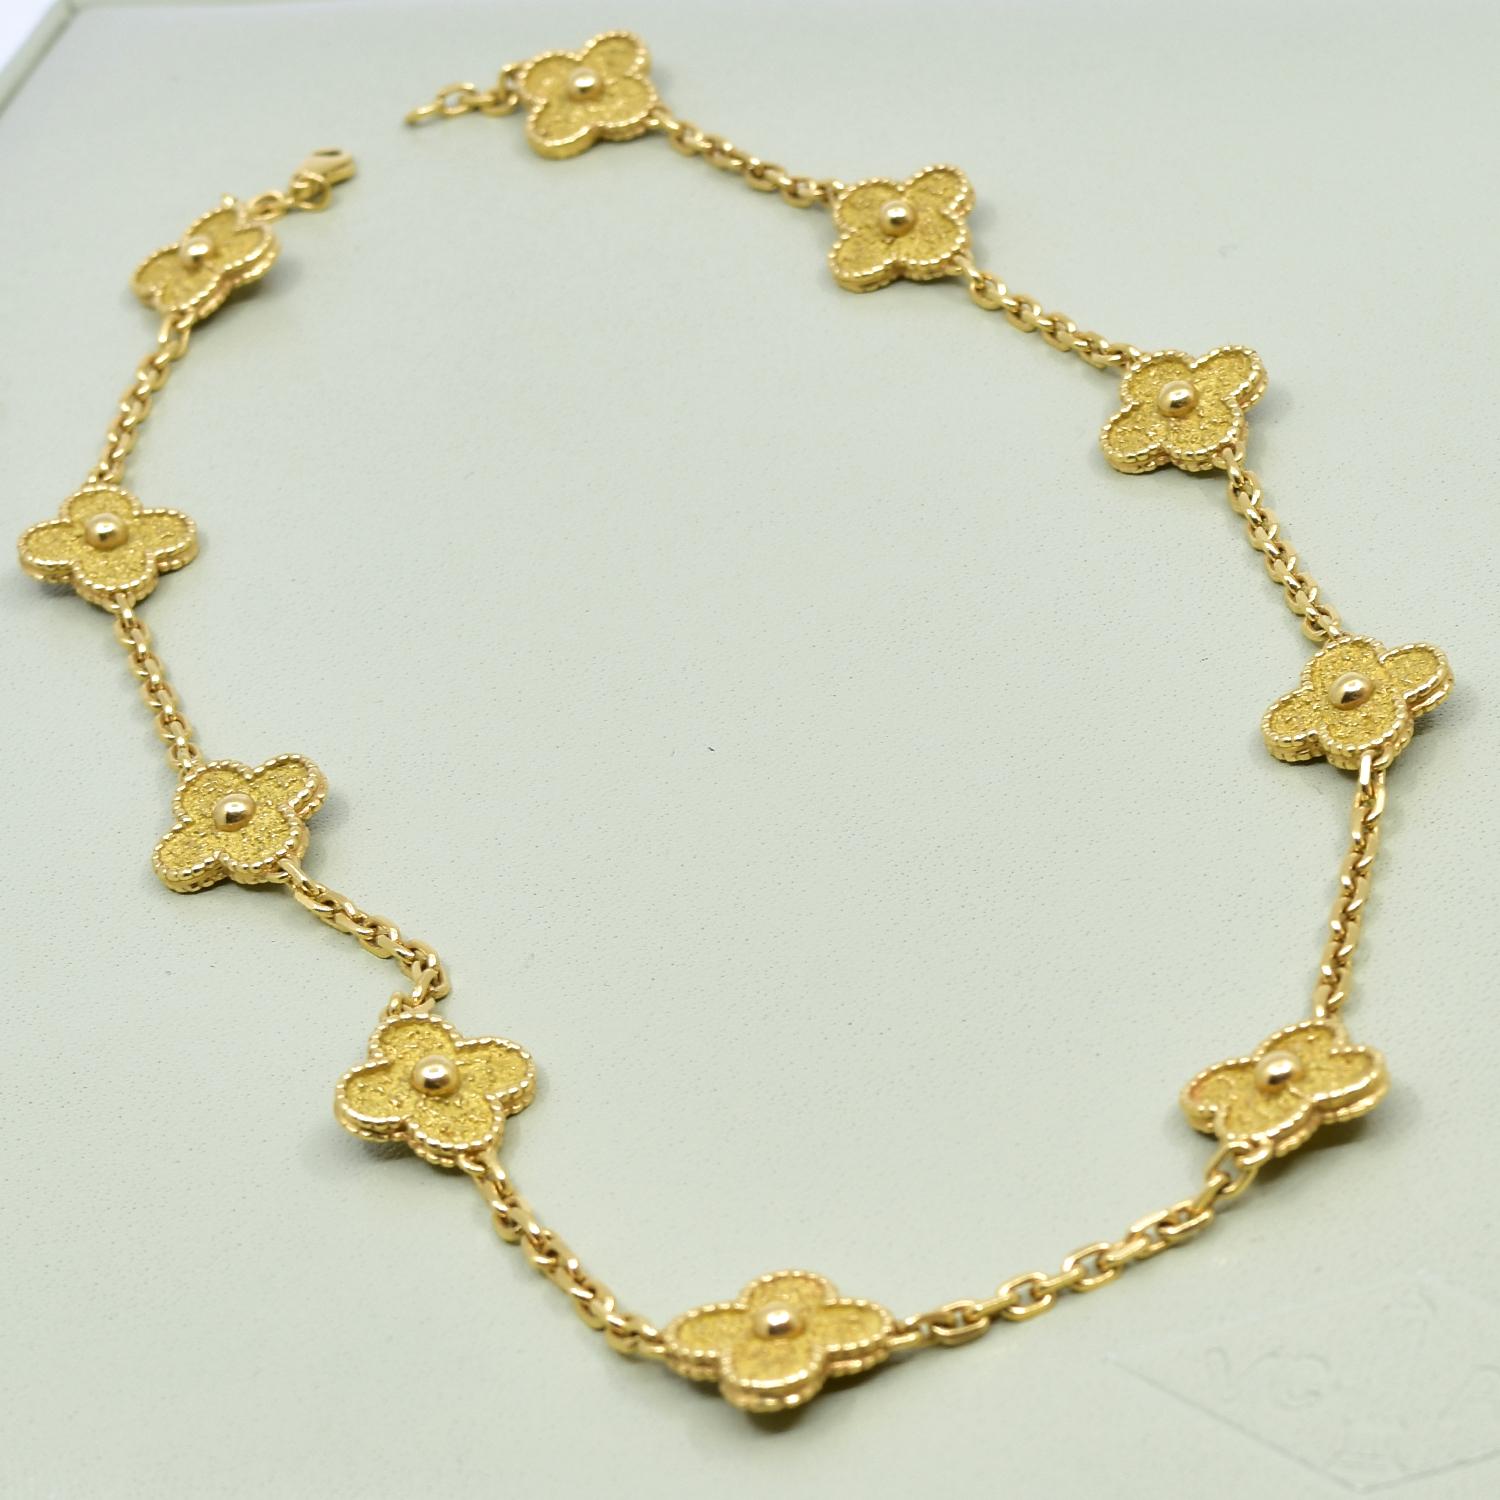 Designer: Van Cleef & Arpels

Collection: Vintage Alhambra

Style: 10 motif necklace

Metal Type: Yellow Gold 

Metal Purity: 18k​​​​​​​

Necklace length: 16.8 inches

Total Item Weight (grams): 30.1 g

​Includes: Brilliance Jewels 2 Year